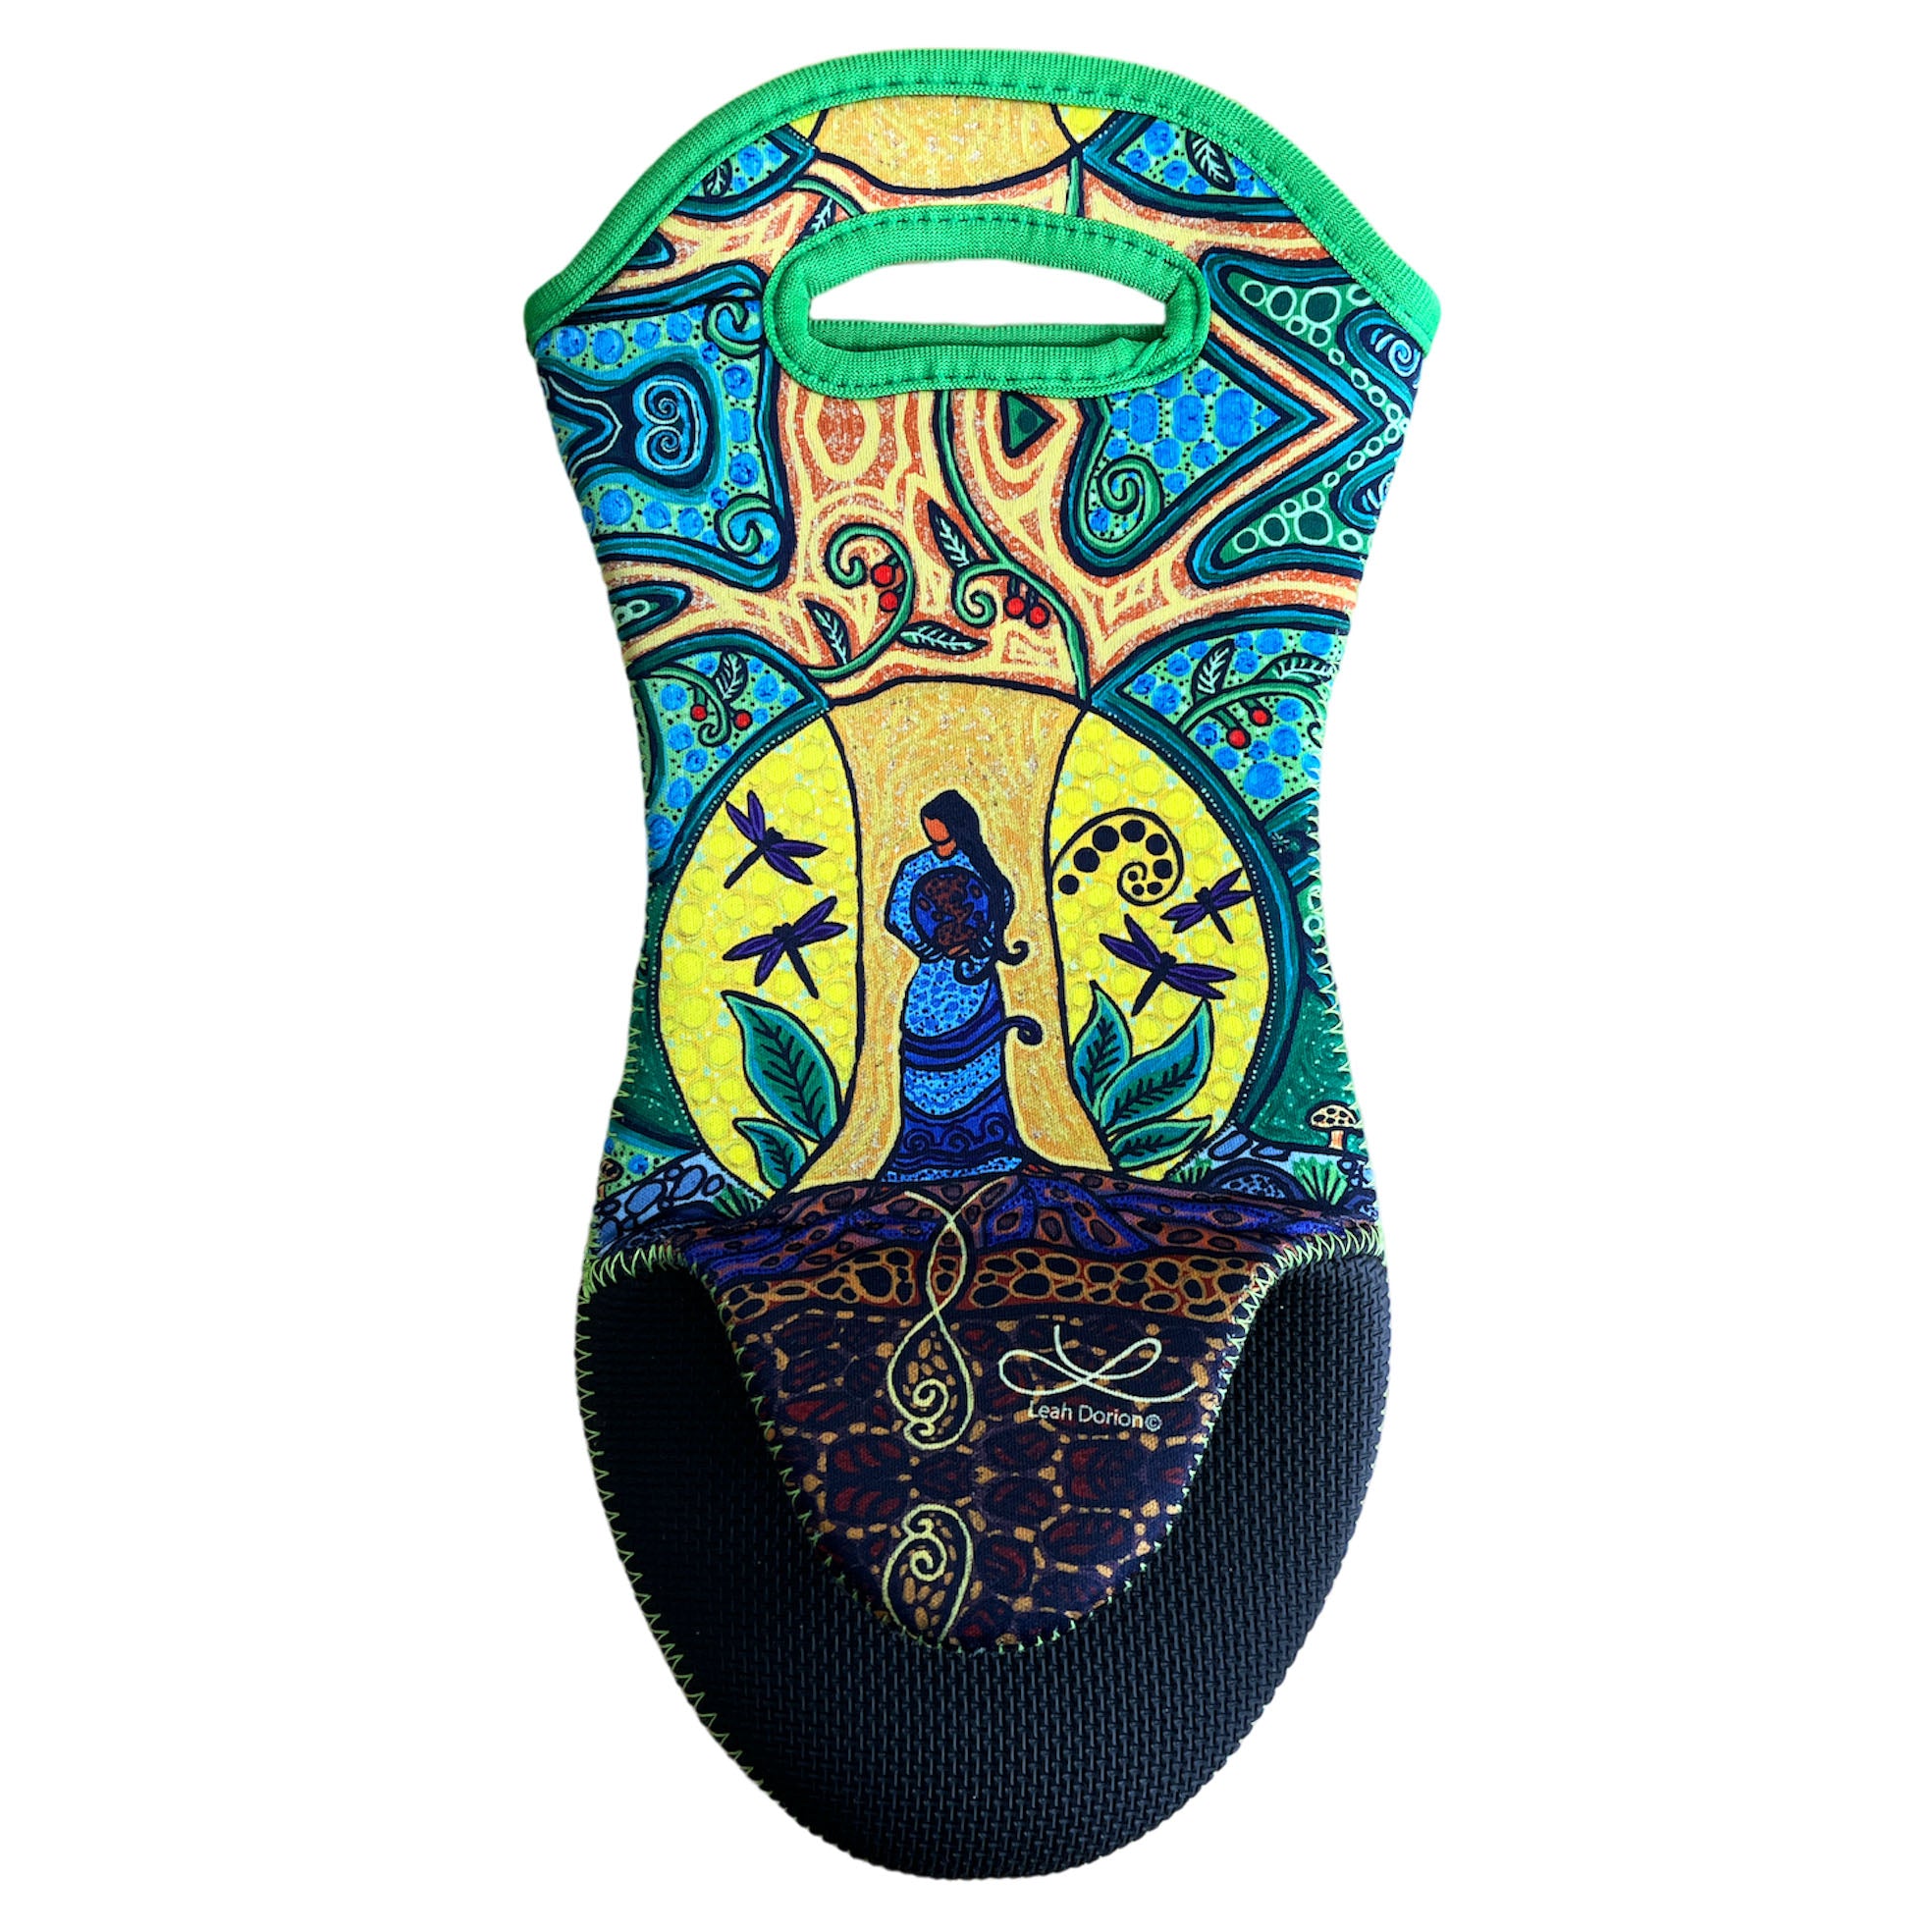 Leah Dorion Strong Earth Woman Oven Mitt